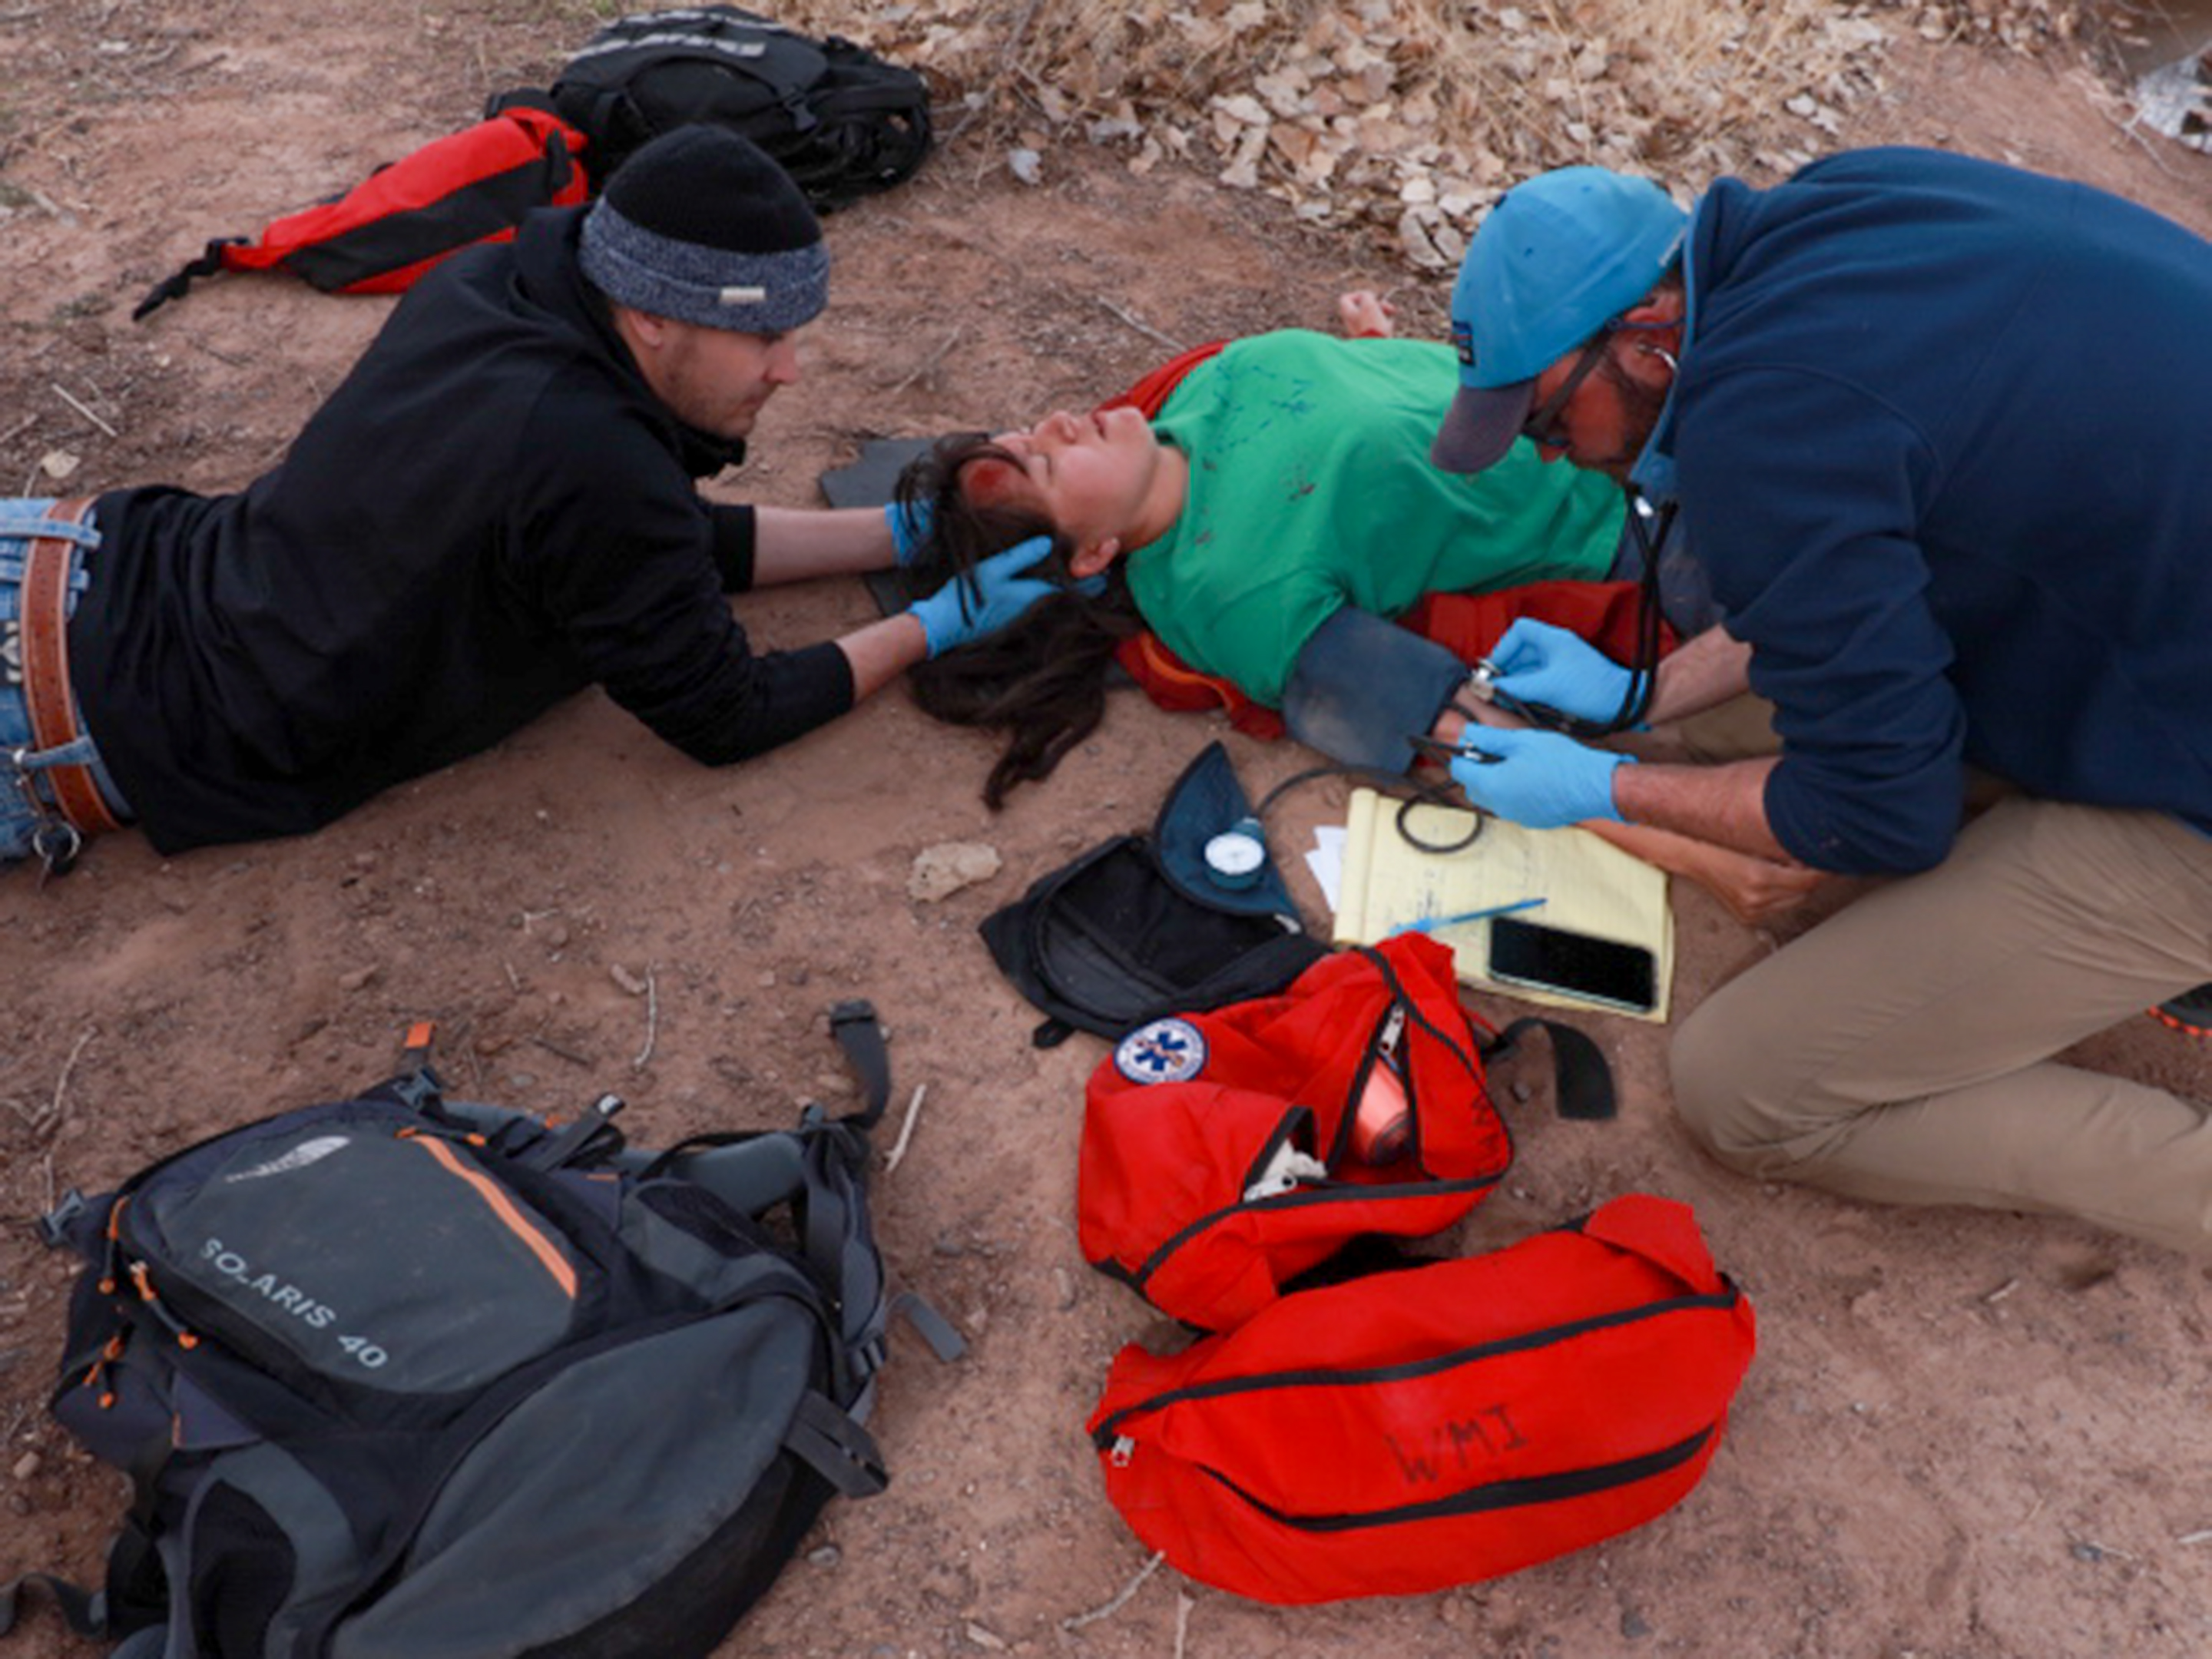 Two rescuers stabilize an unconscious patient's head and check her blood pressure.